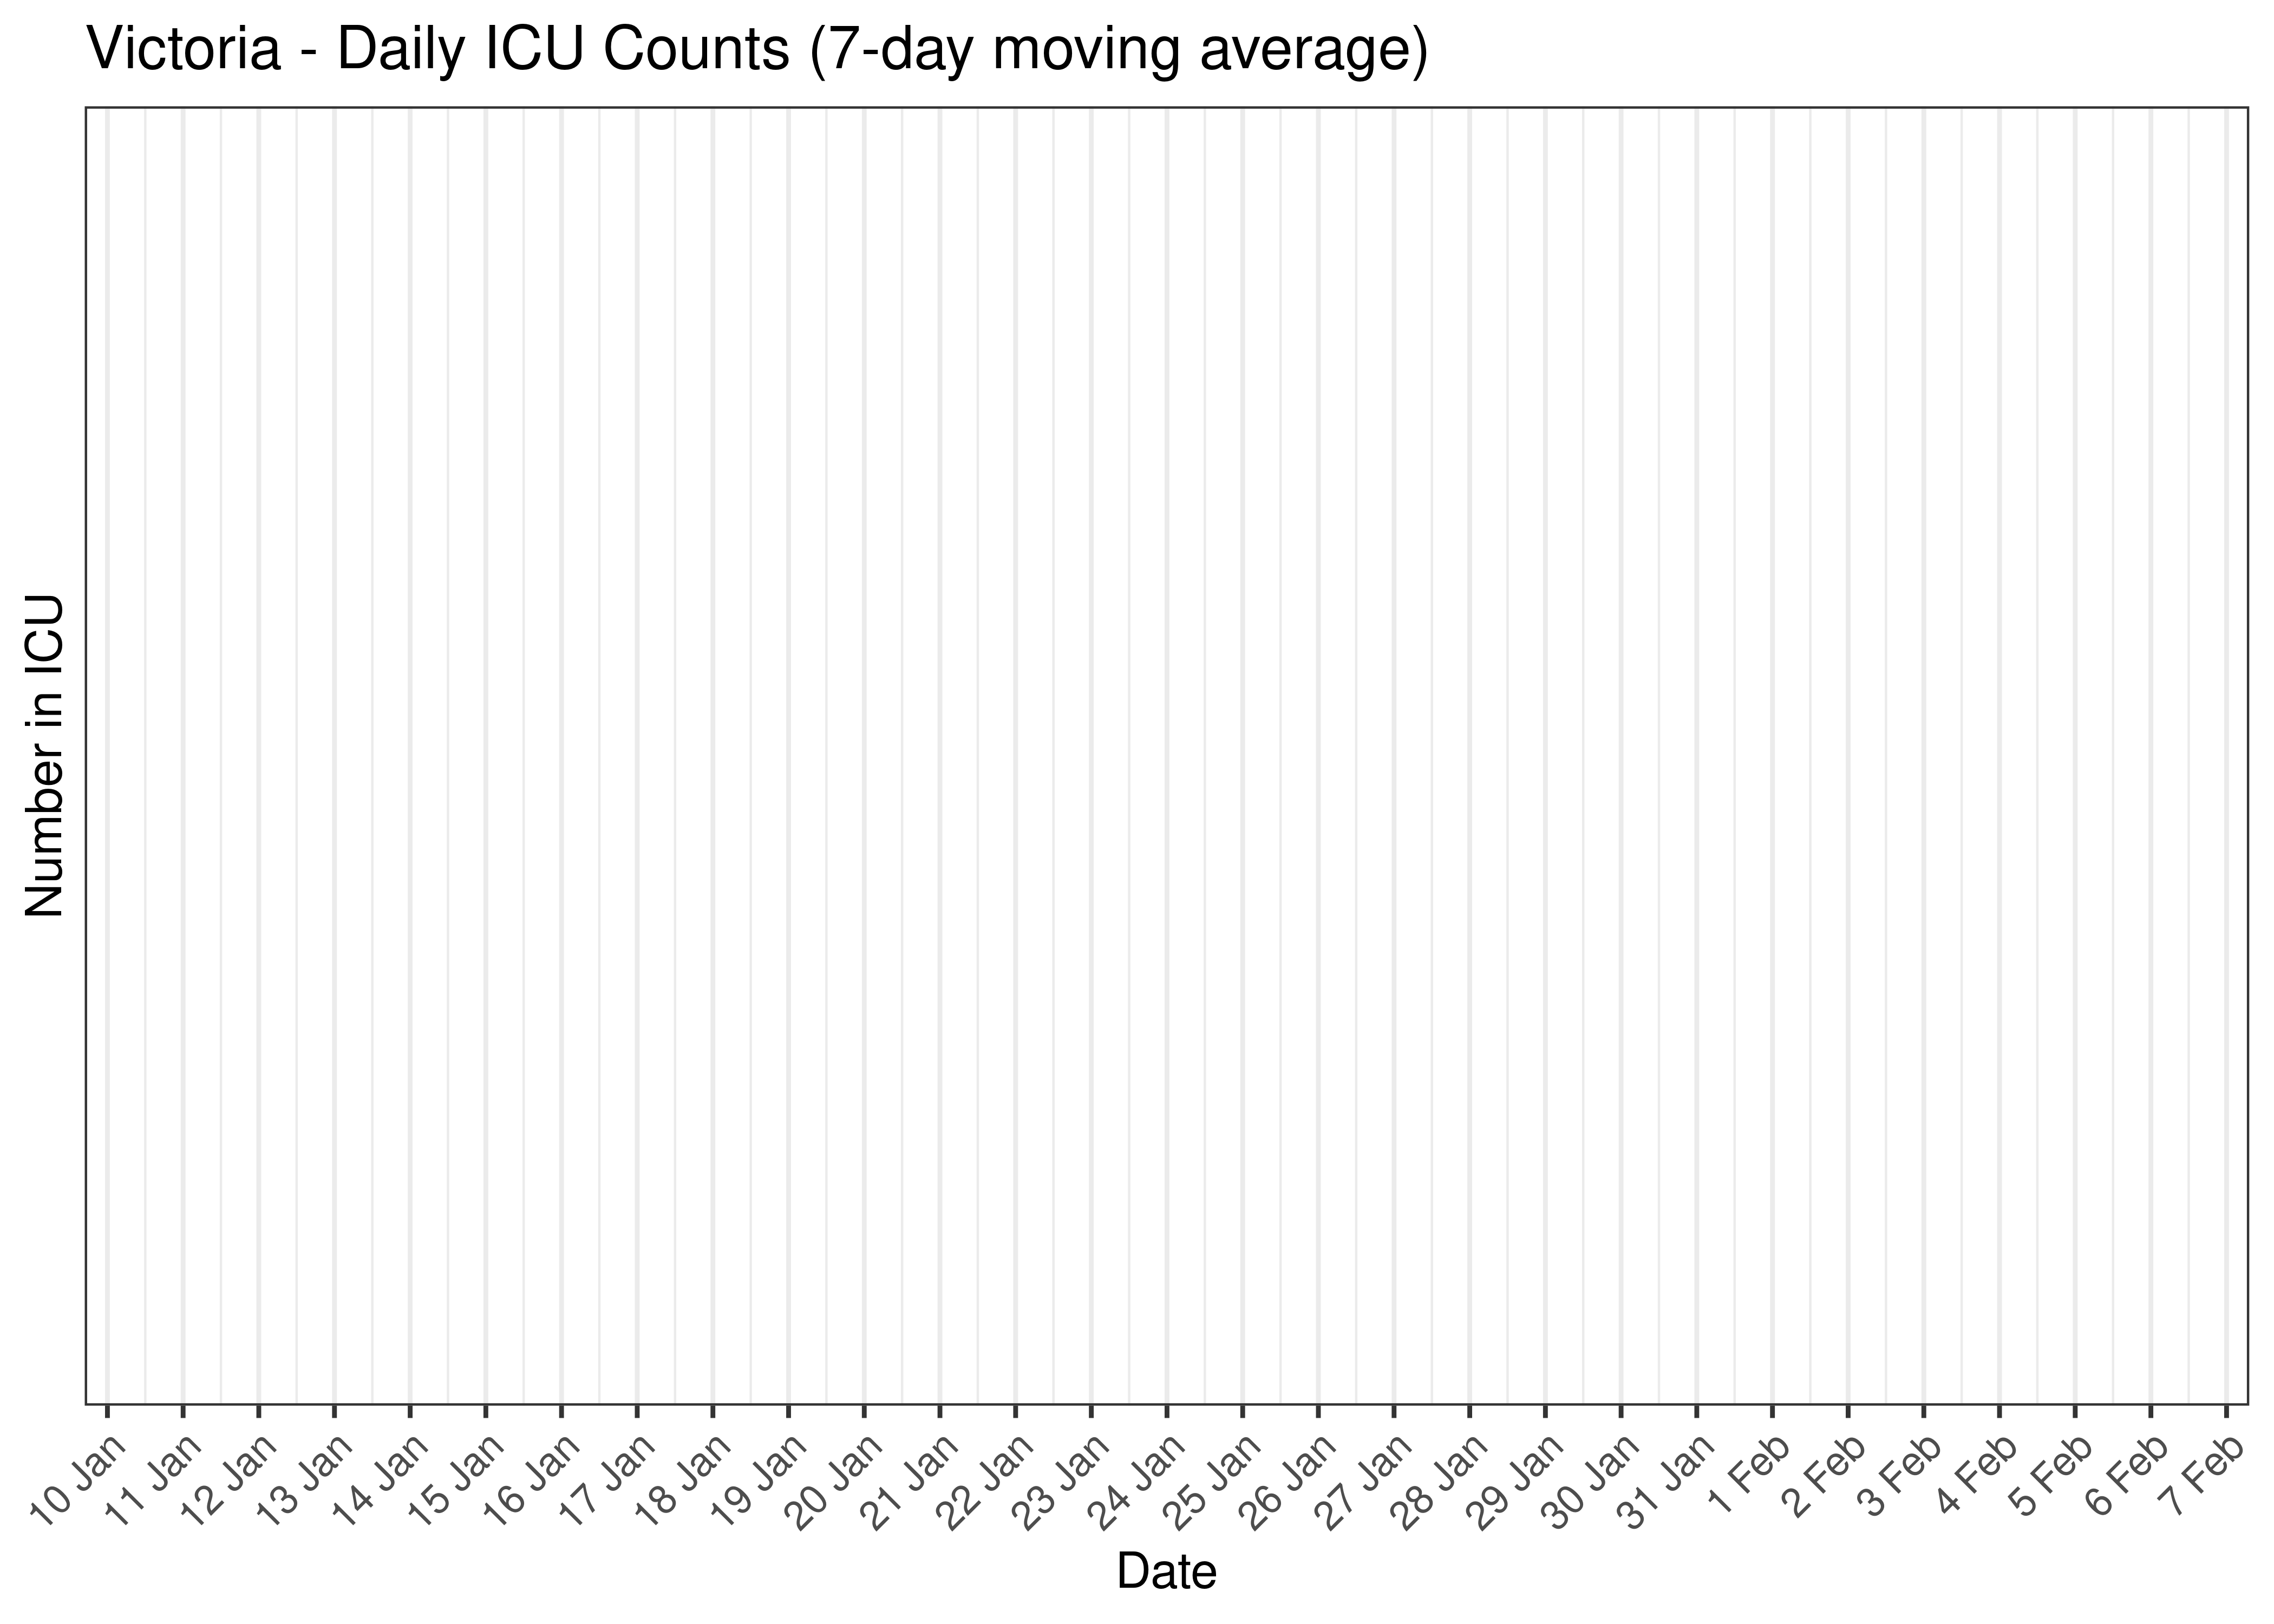 Victoria - Daily ICU Counts for Last 30-days (7-day moving average)